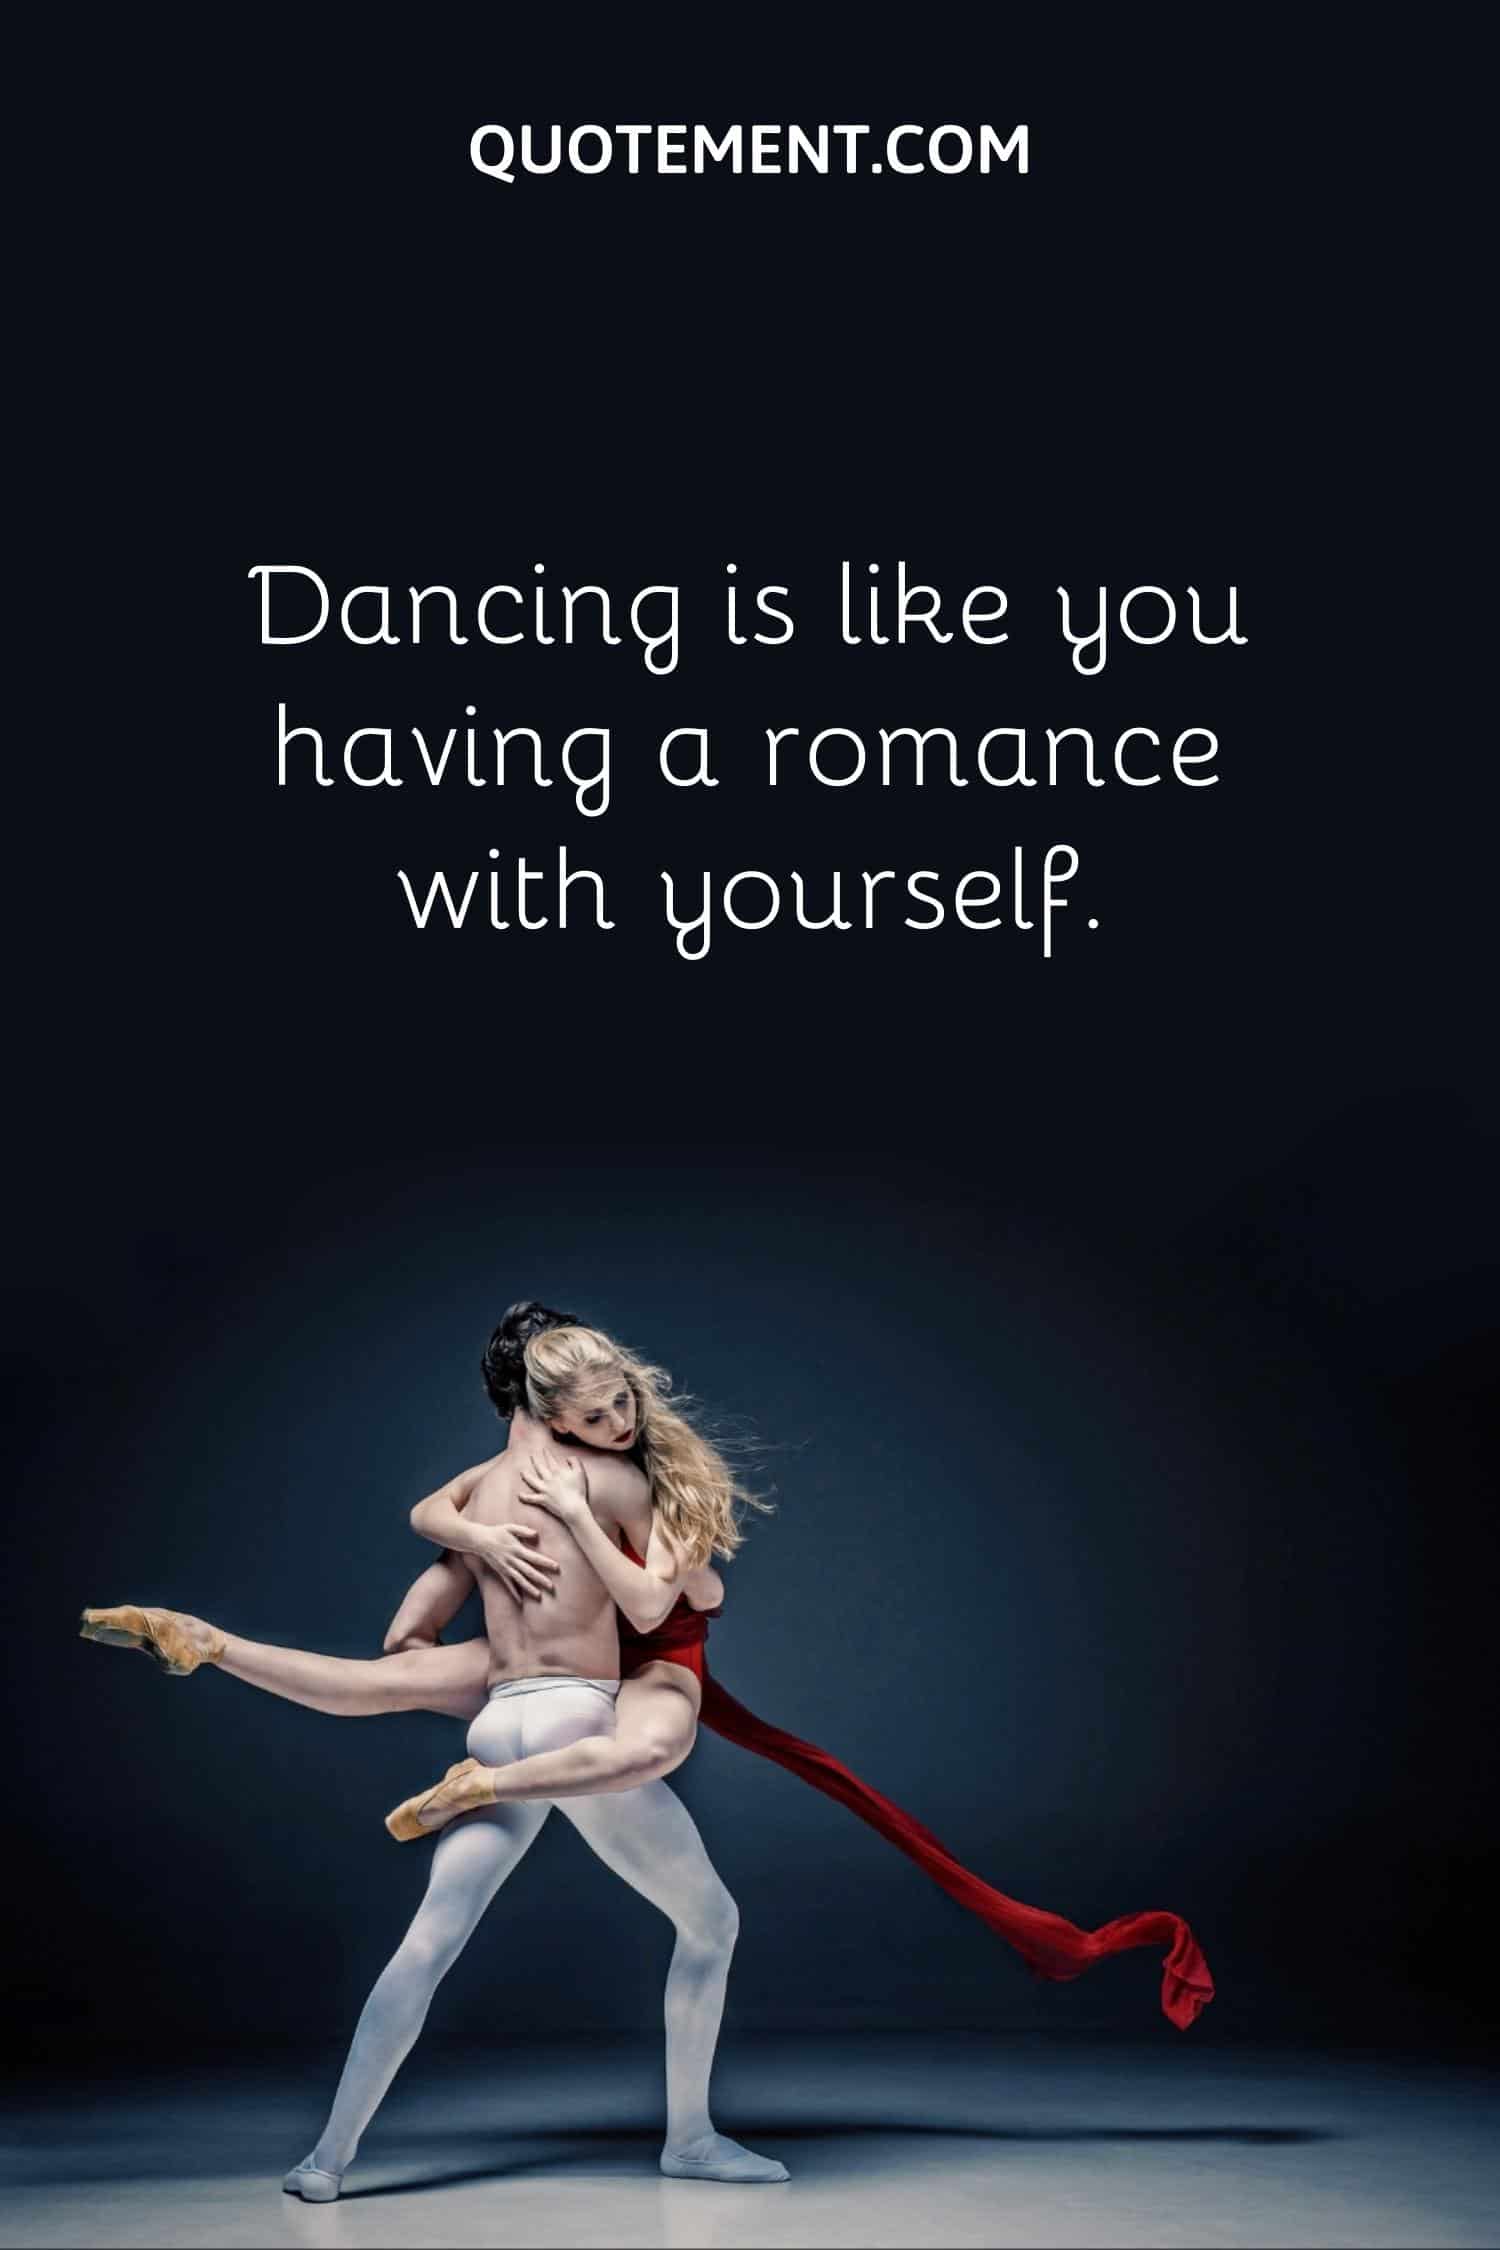 Dancing is like you having a romance with yourself